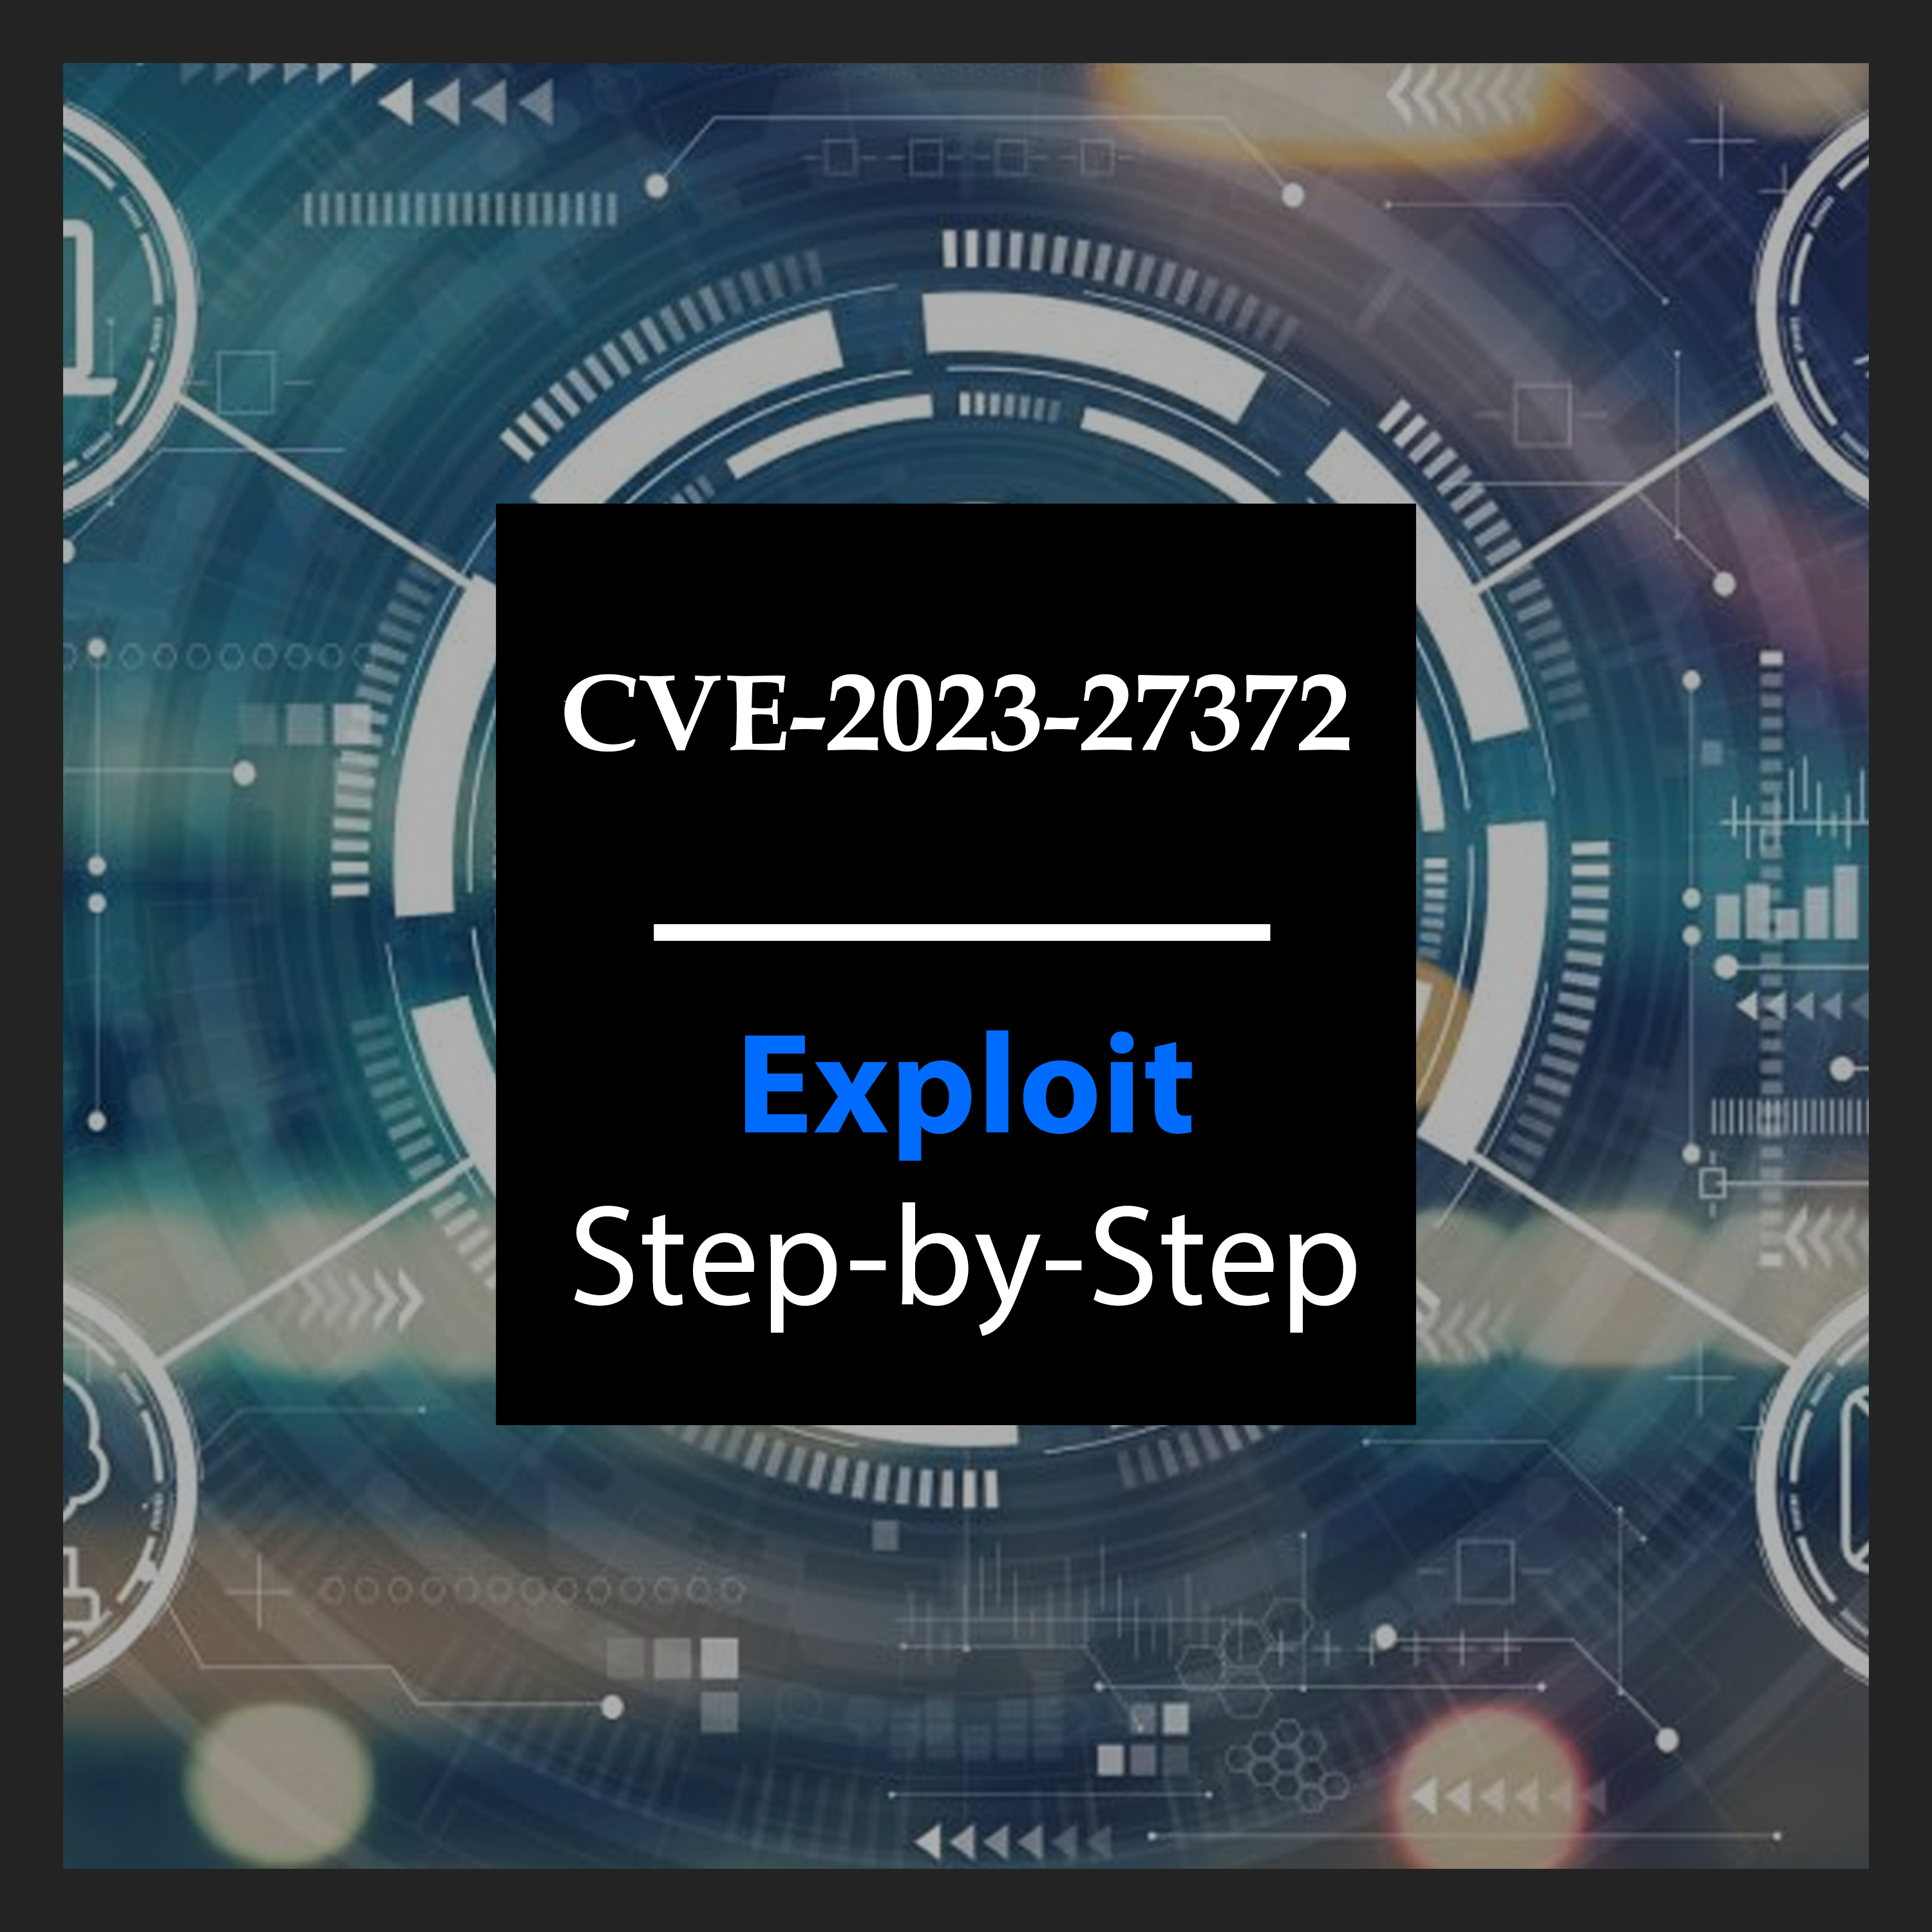 CVE-2023-27372: Remote Code Execution in SPIP